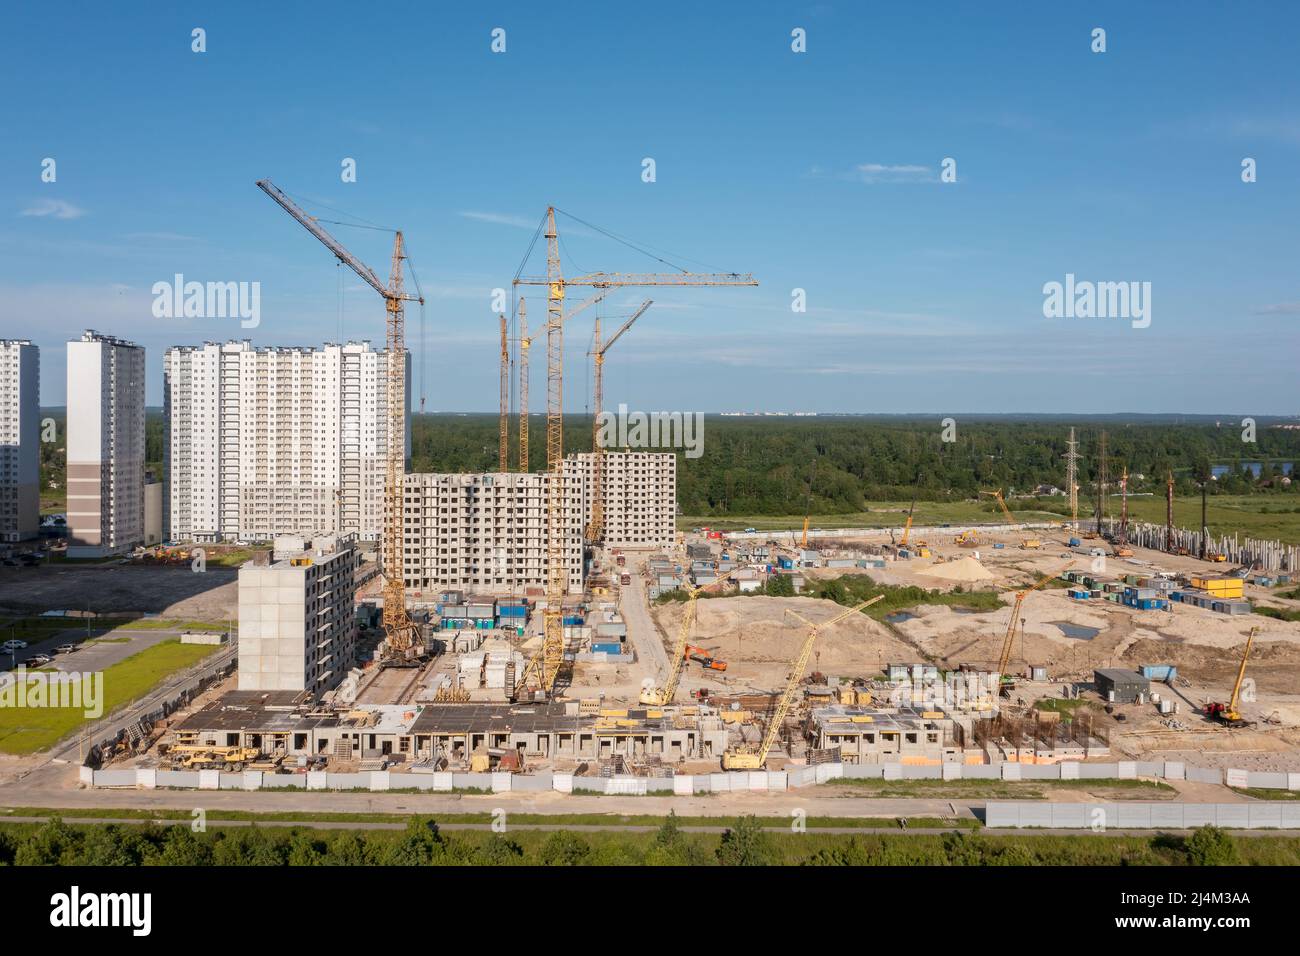 Building crane and buildings under construction Stock Photo